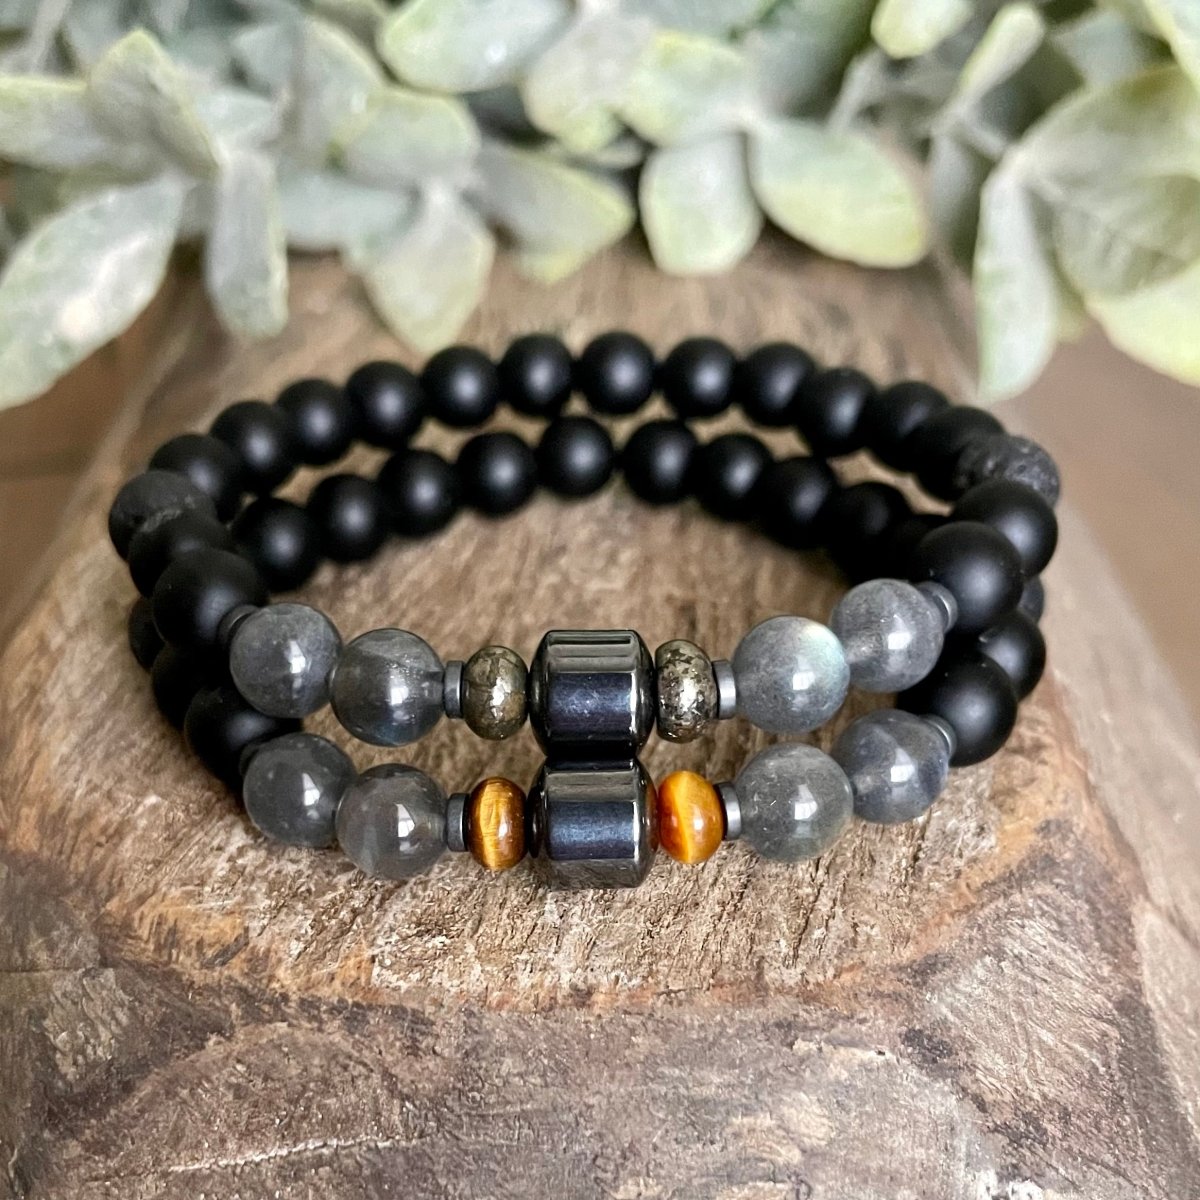 Negative Energy Protection Bracelet for Men and Guys